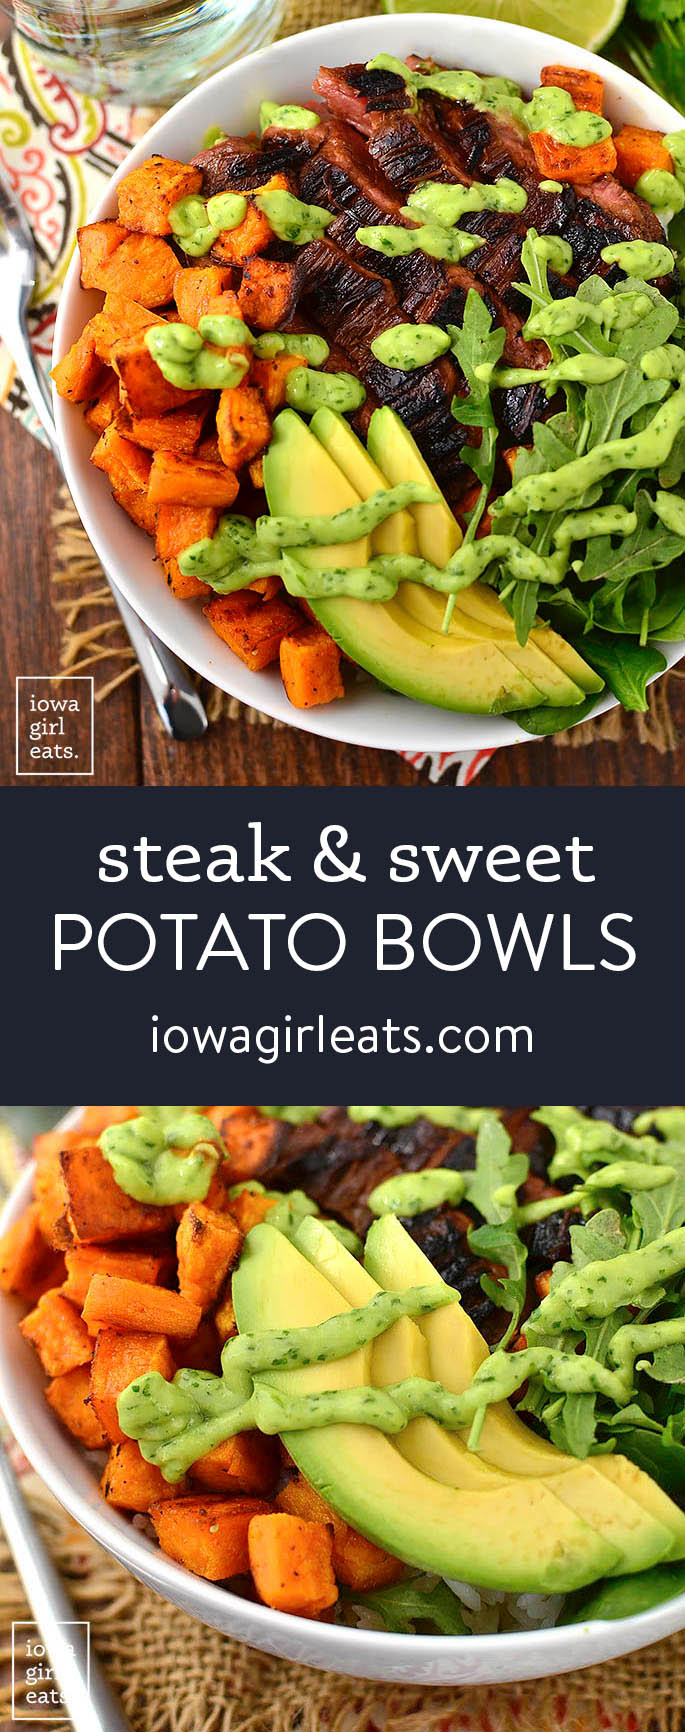 Photo collage of steak and sweet potato bowls